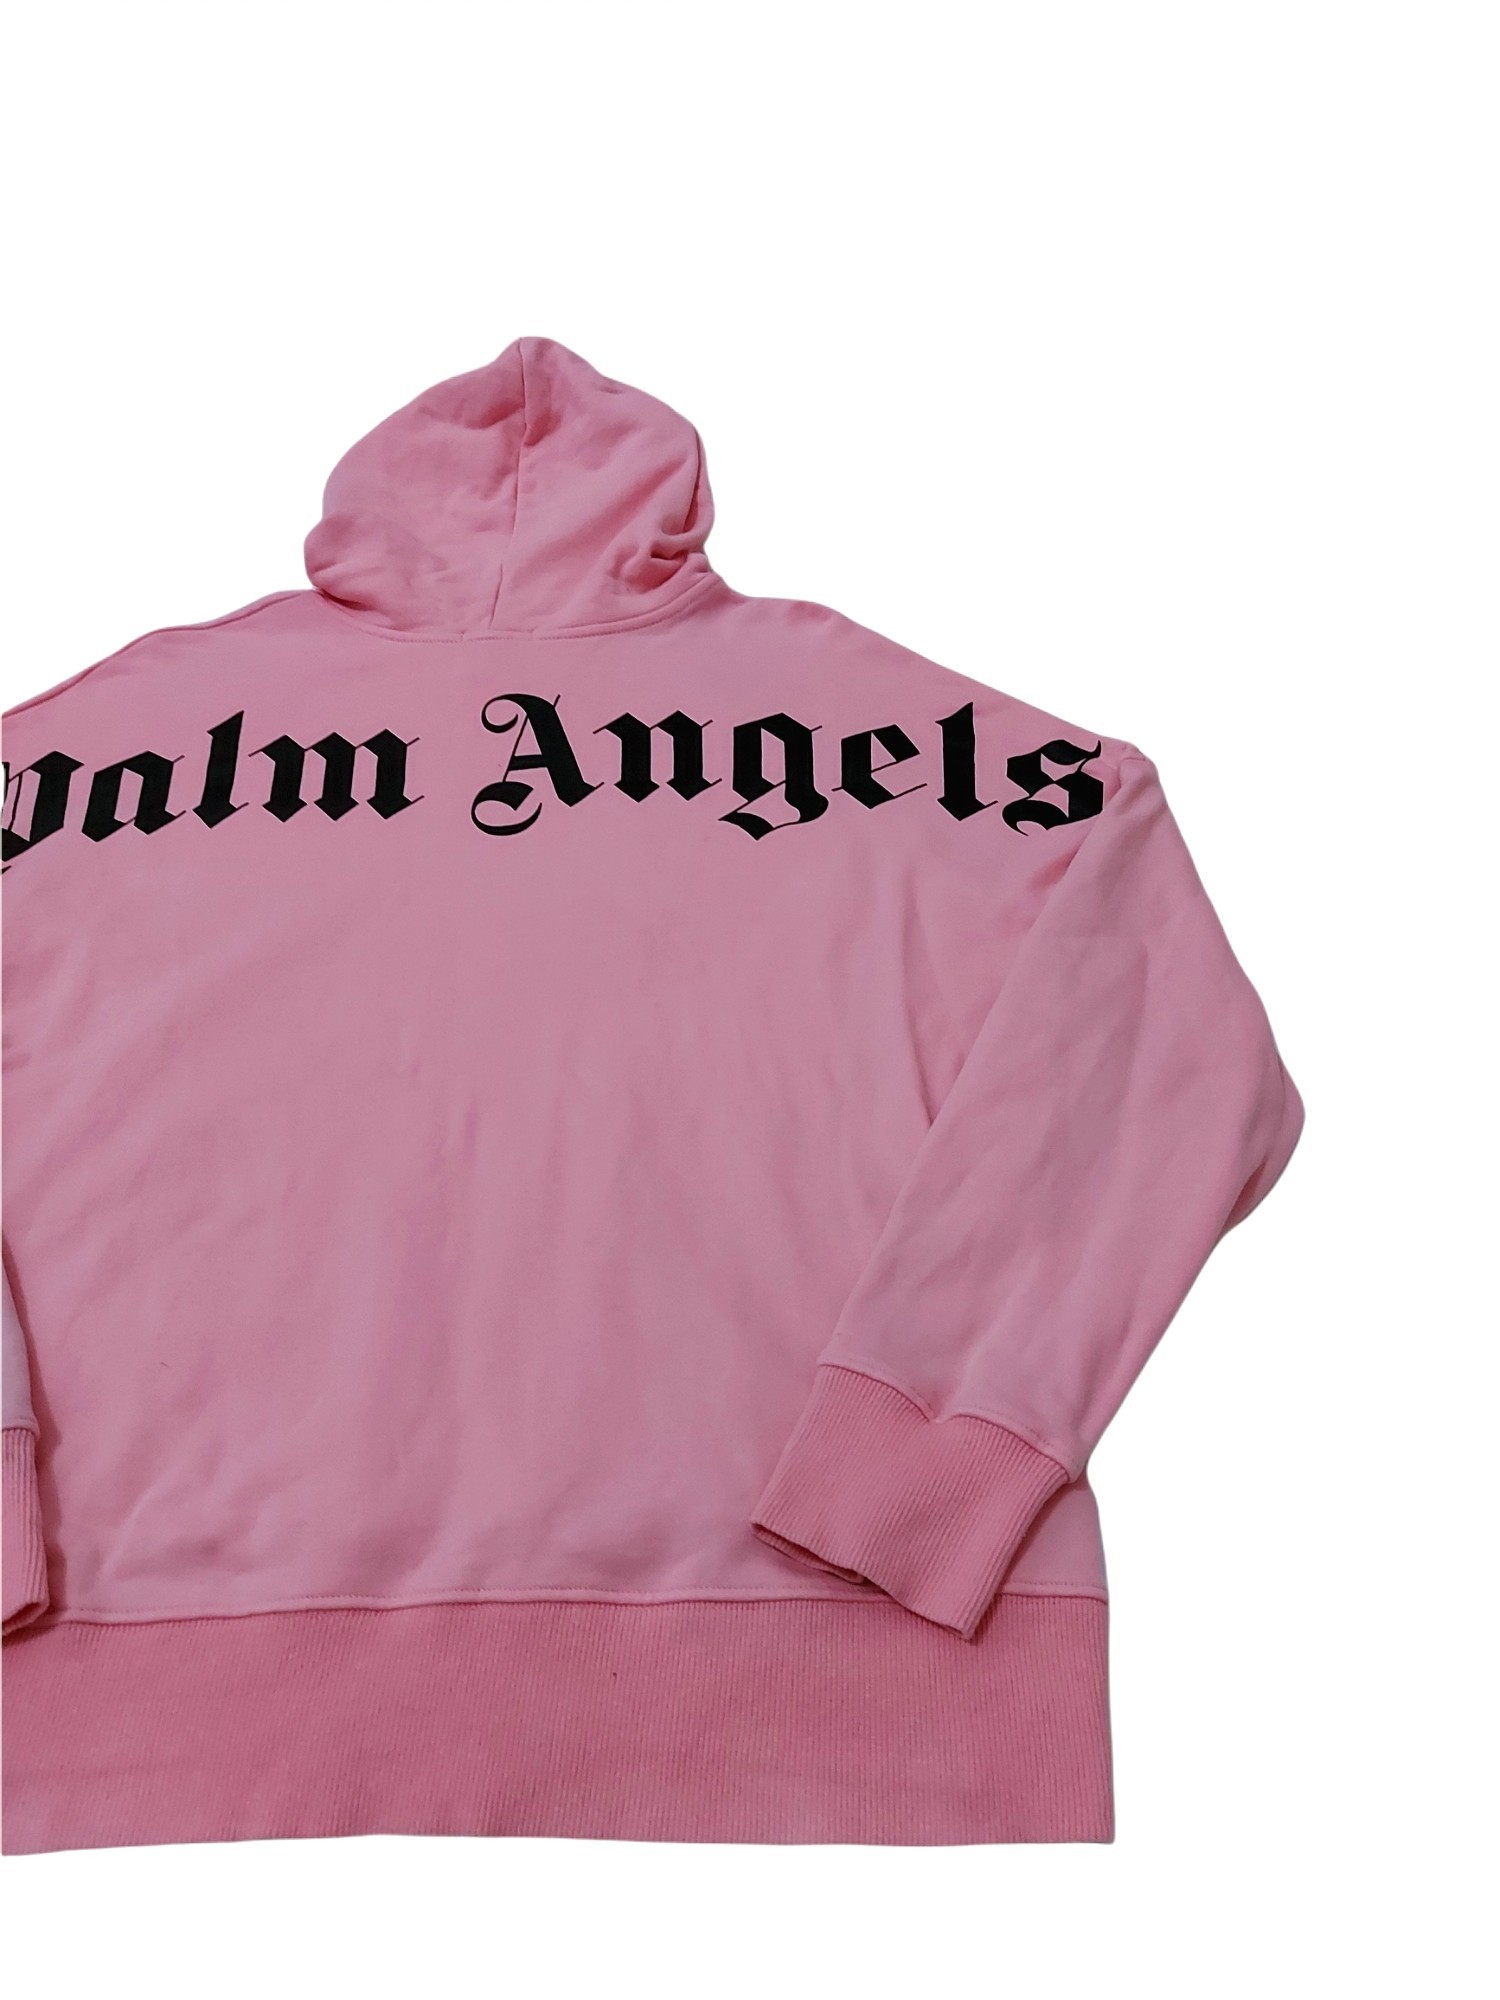 RARE! PALM ANGELS CLASSIC BIG SPELL OUT BACK HIT - 4